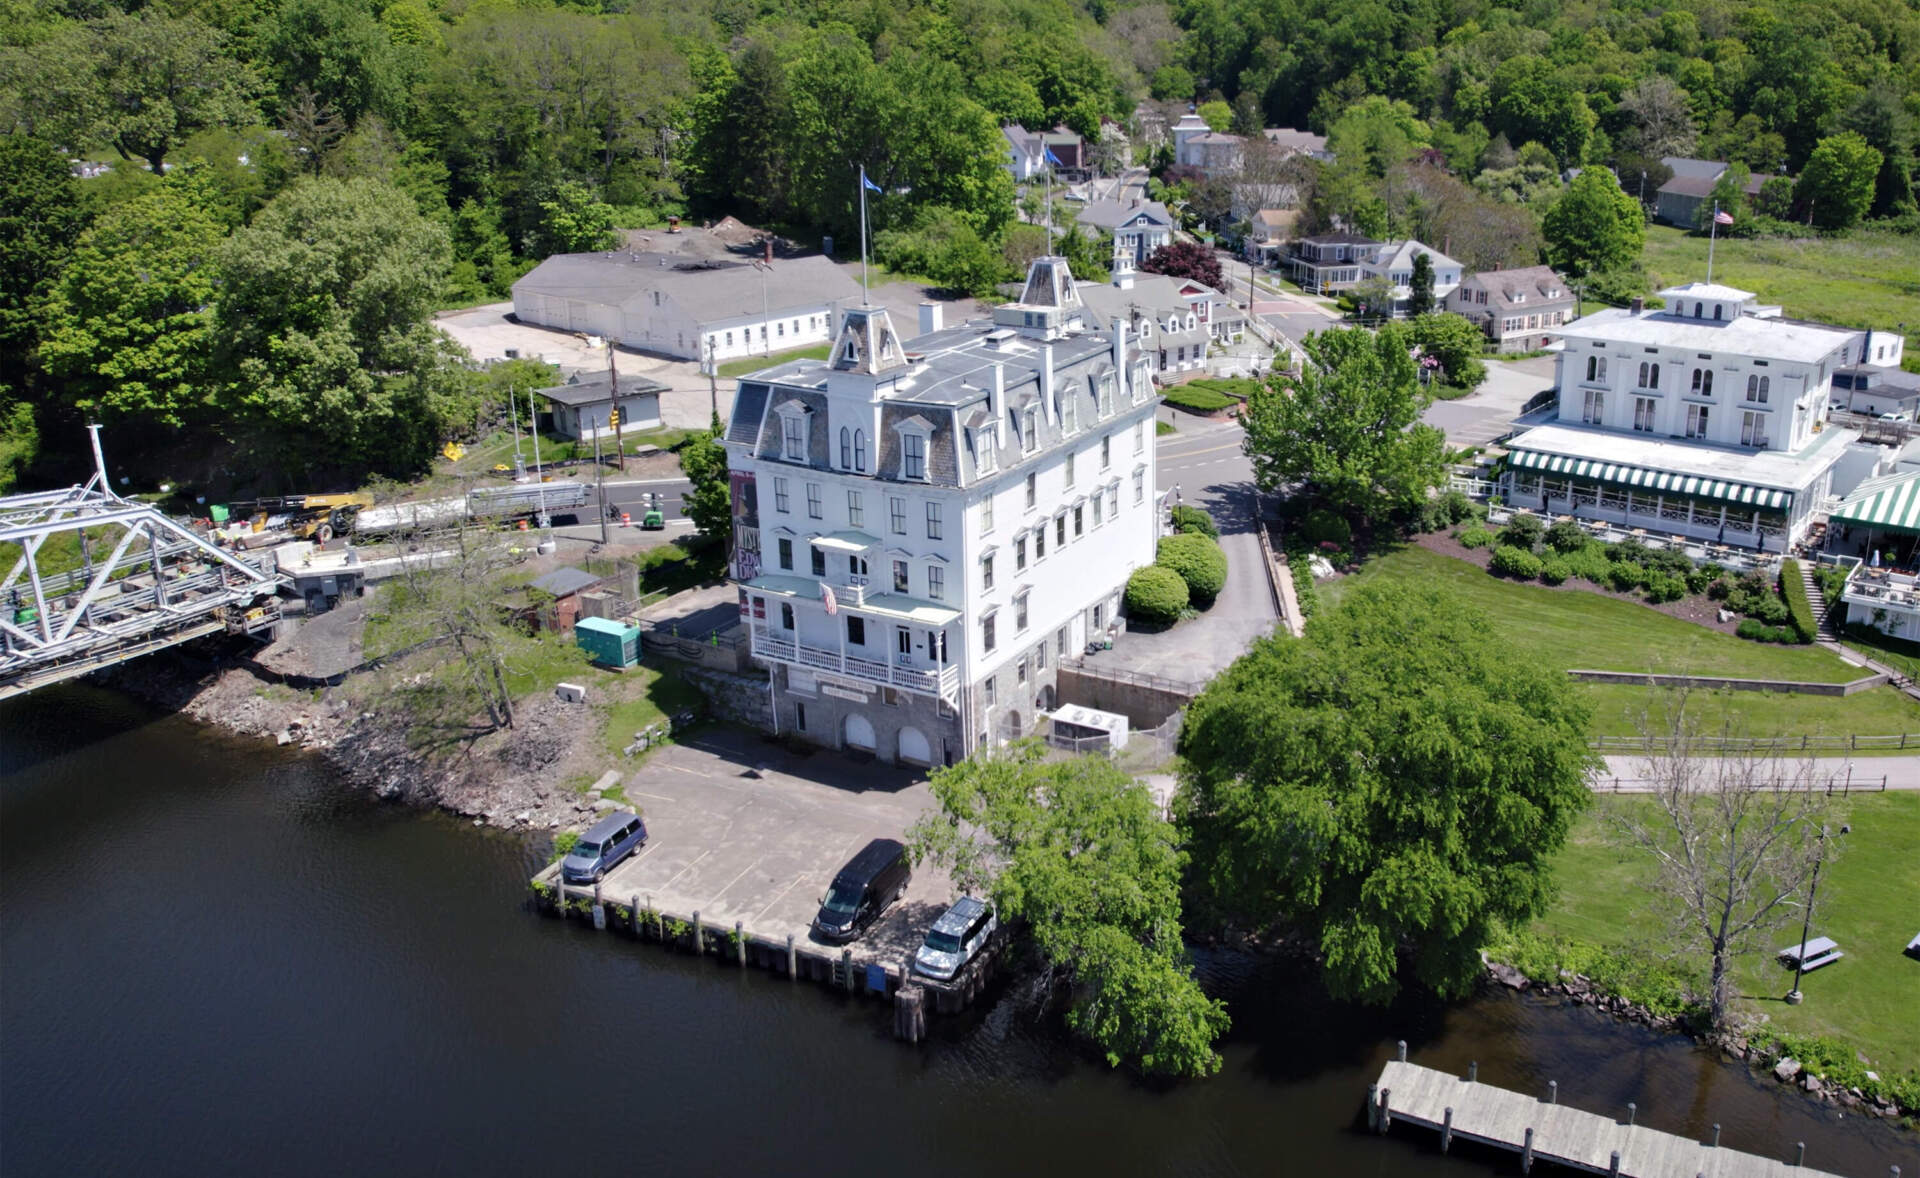 The Goodspeed Opera House on the banks of the Connecticut River of East Haddam in 2024. (Dave Wurtzel/Connecticut Public)